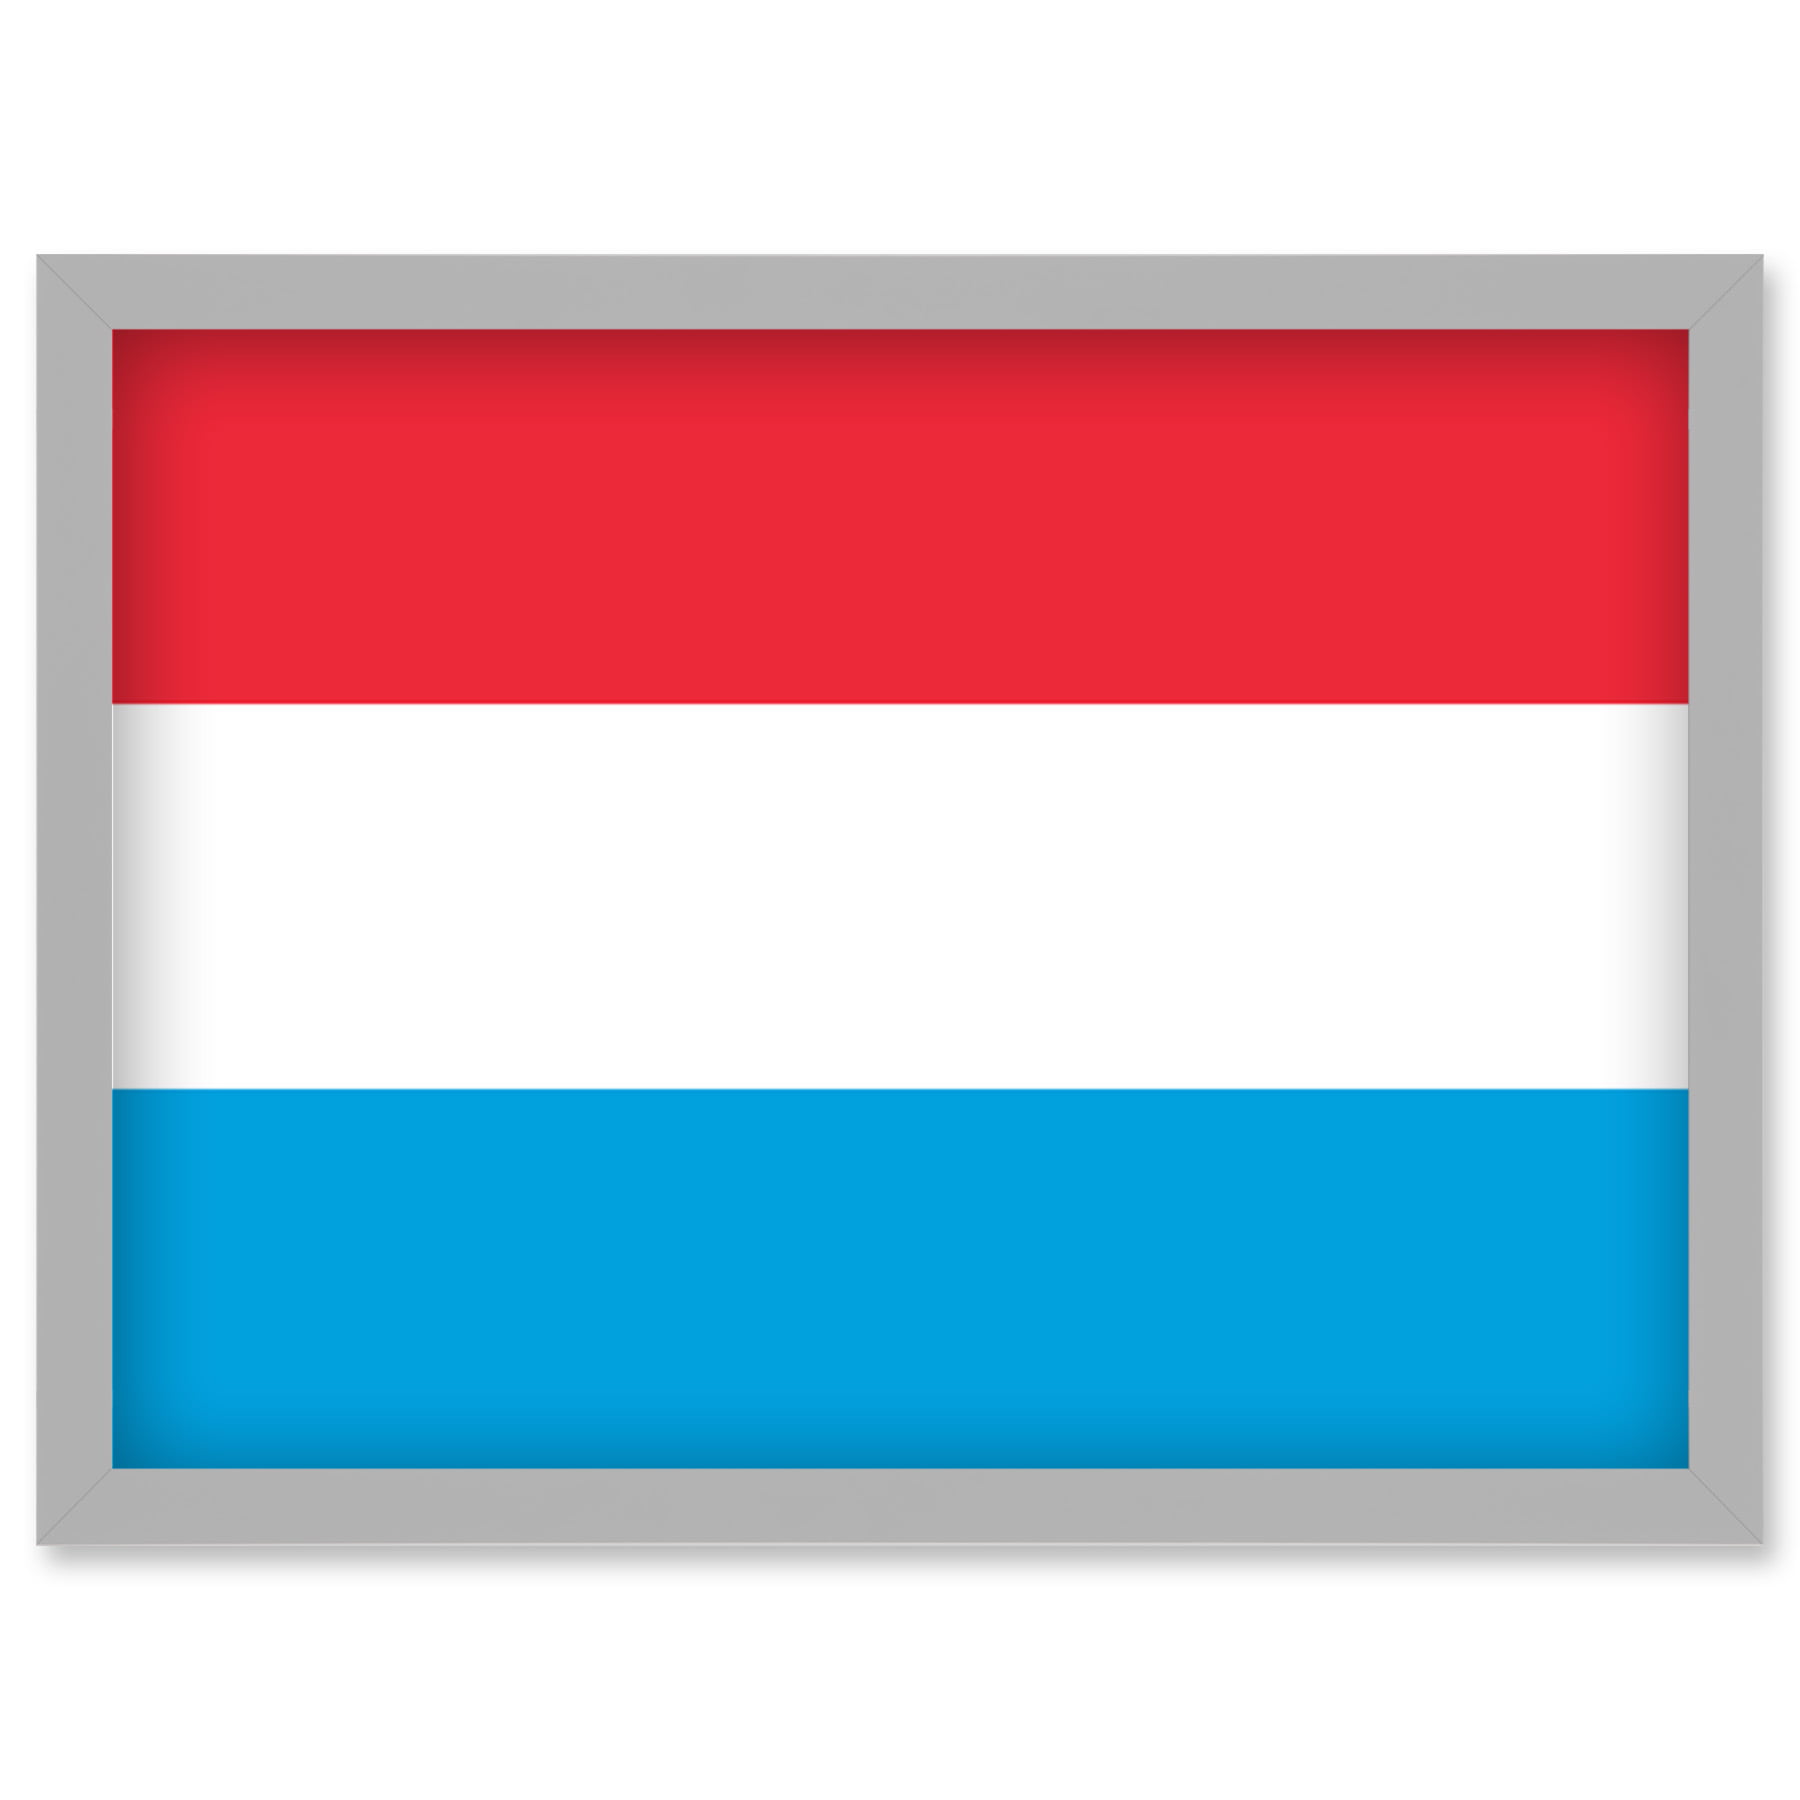 Luxembourg national flag patriotic vexillology world flags country region poster artwork framed wall art print a